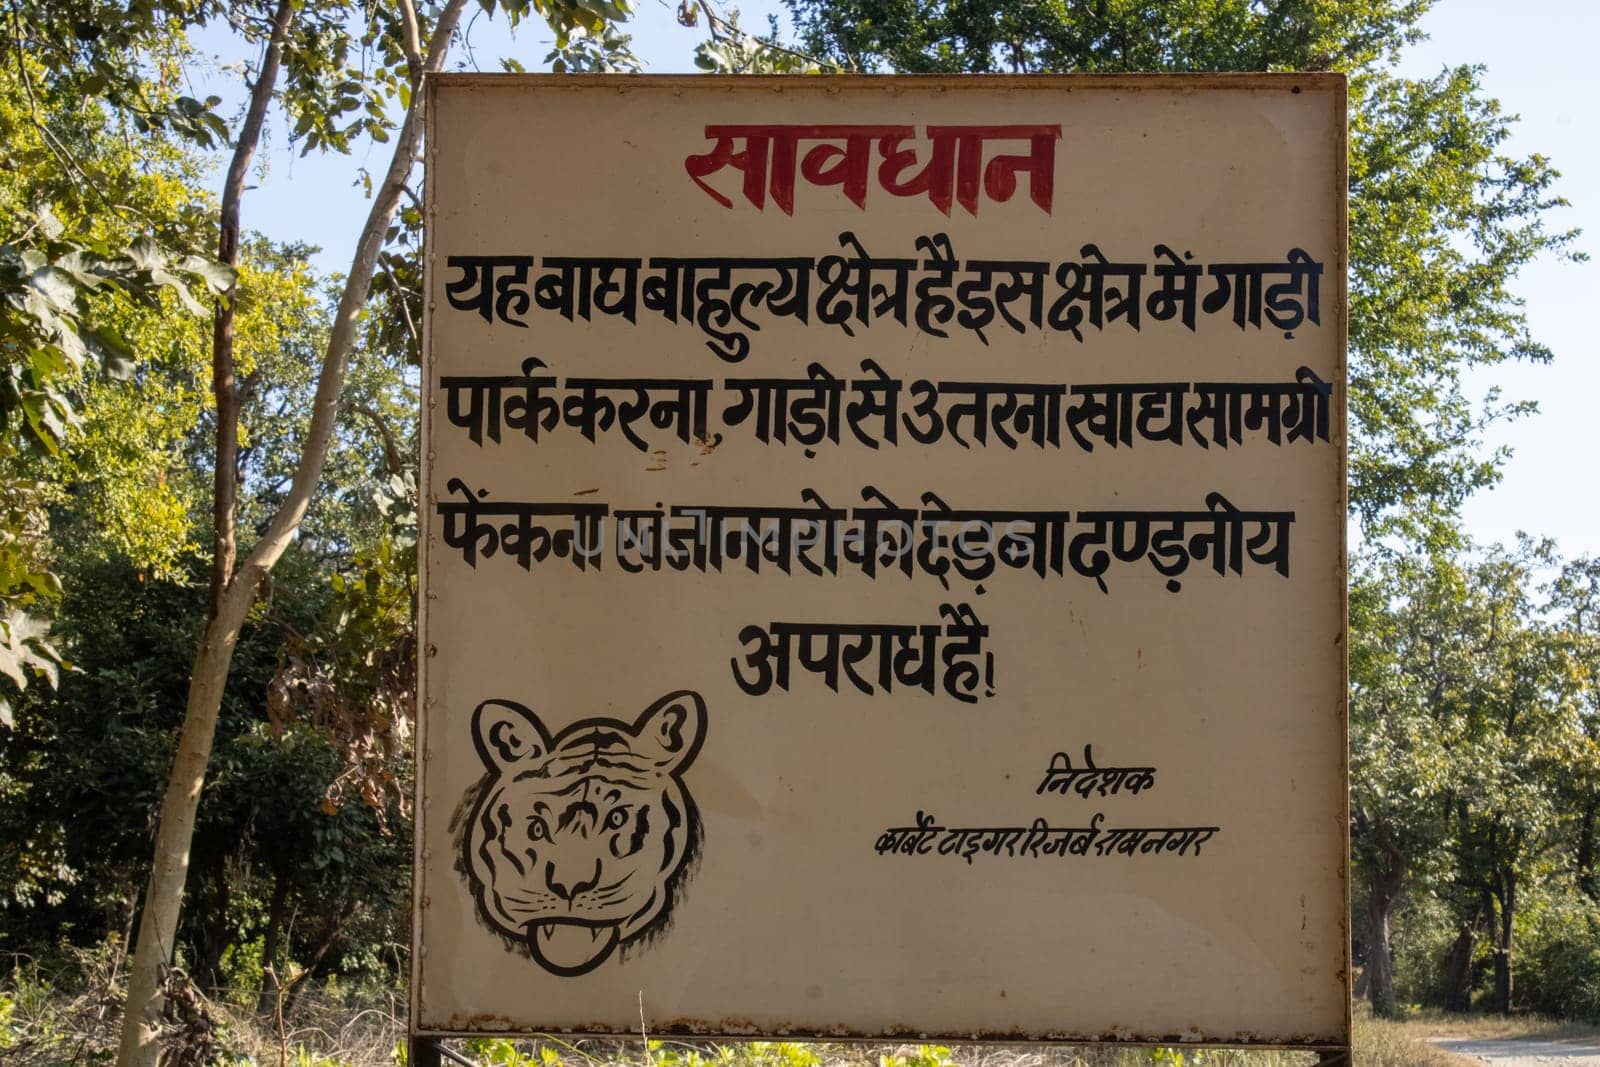 Navigating the wild with vigilance, Corbett Tiger Reserve's boarded alert commands.High quality image